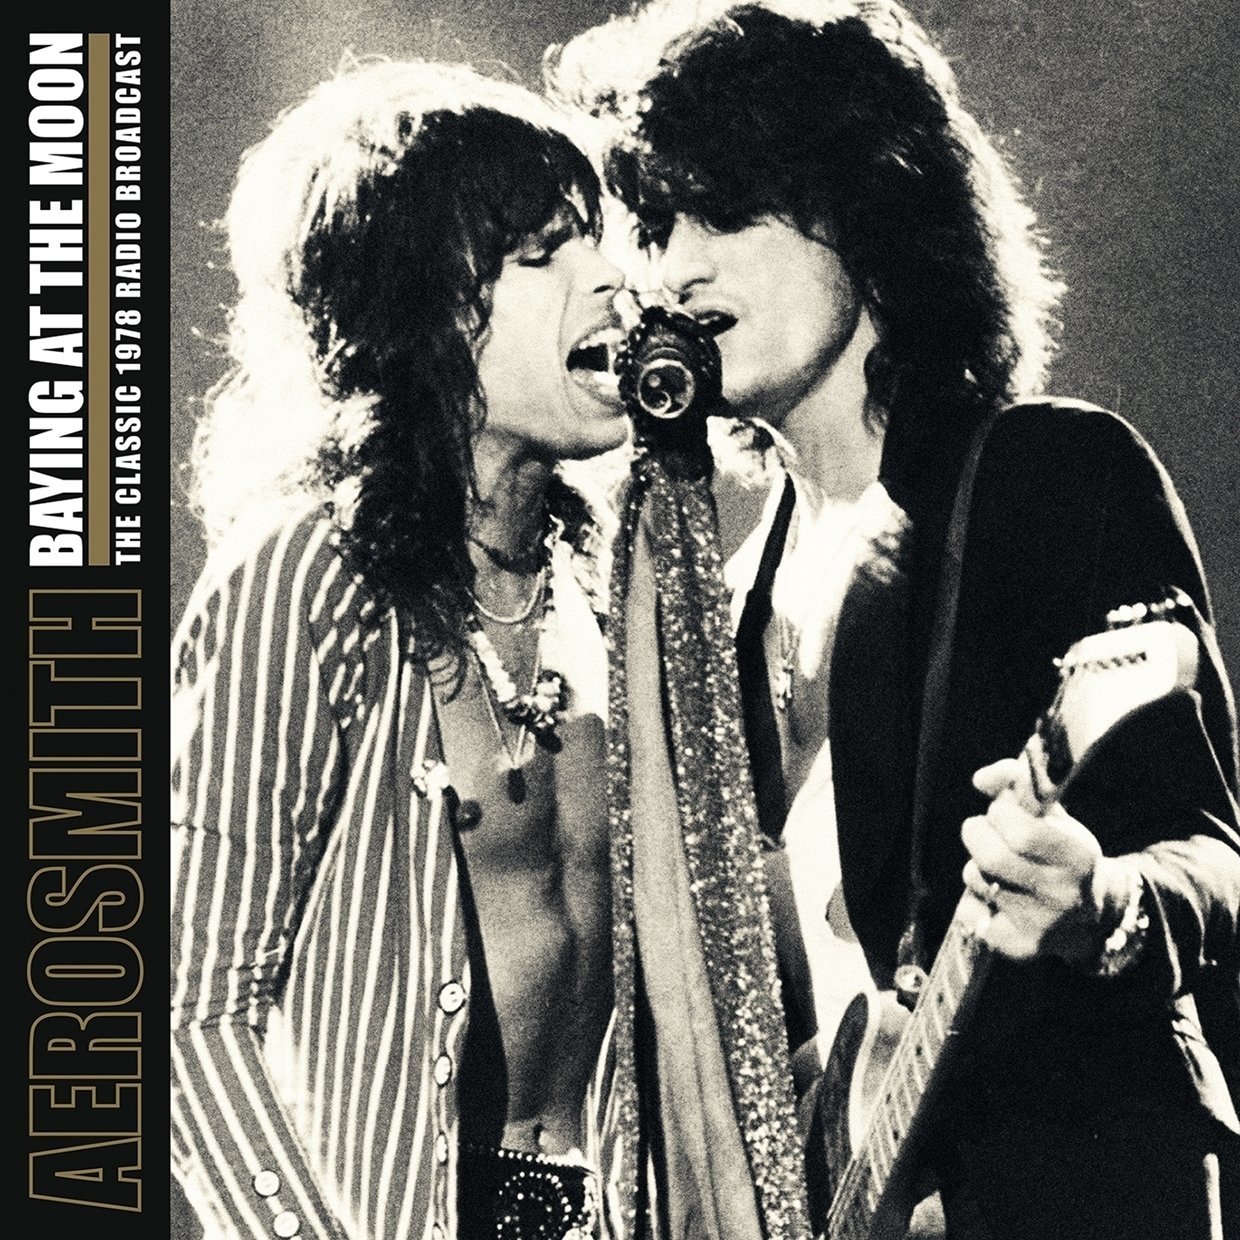 Disco in vinile Aerosmith - Baying At The Moon (2 LP)